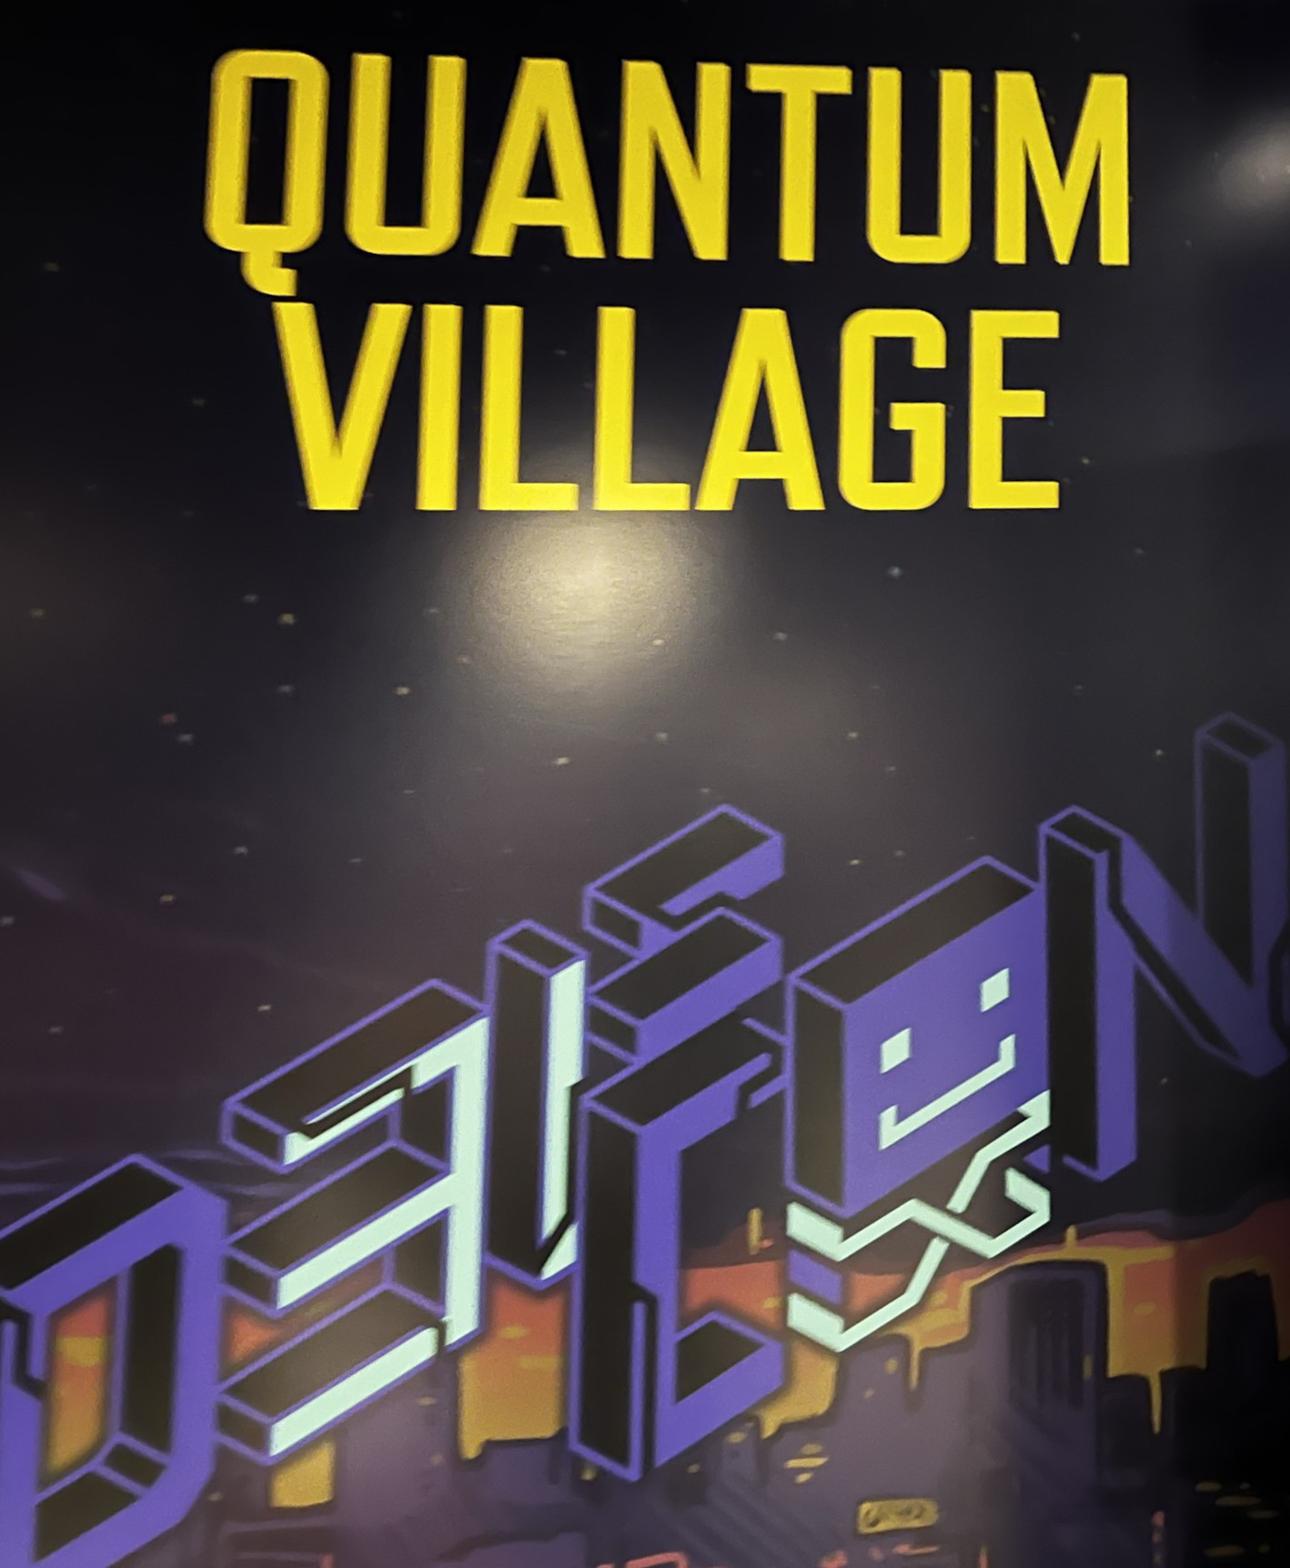 Sign for Quantum Village outside of the venue.